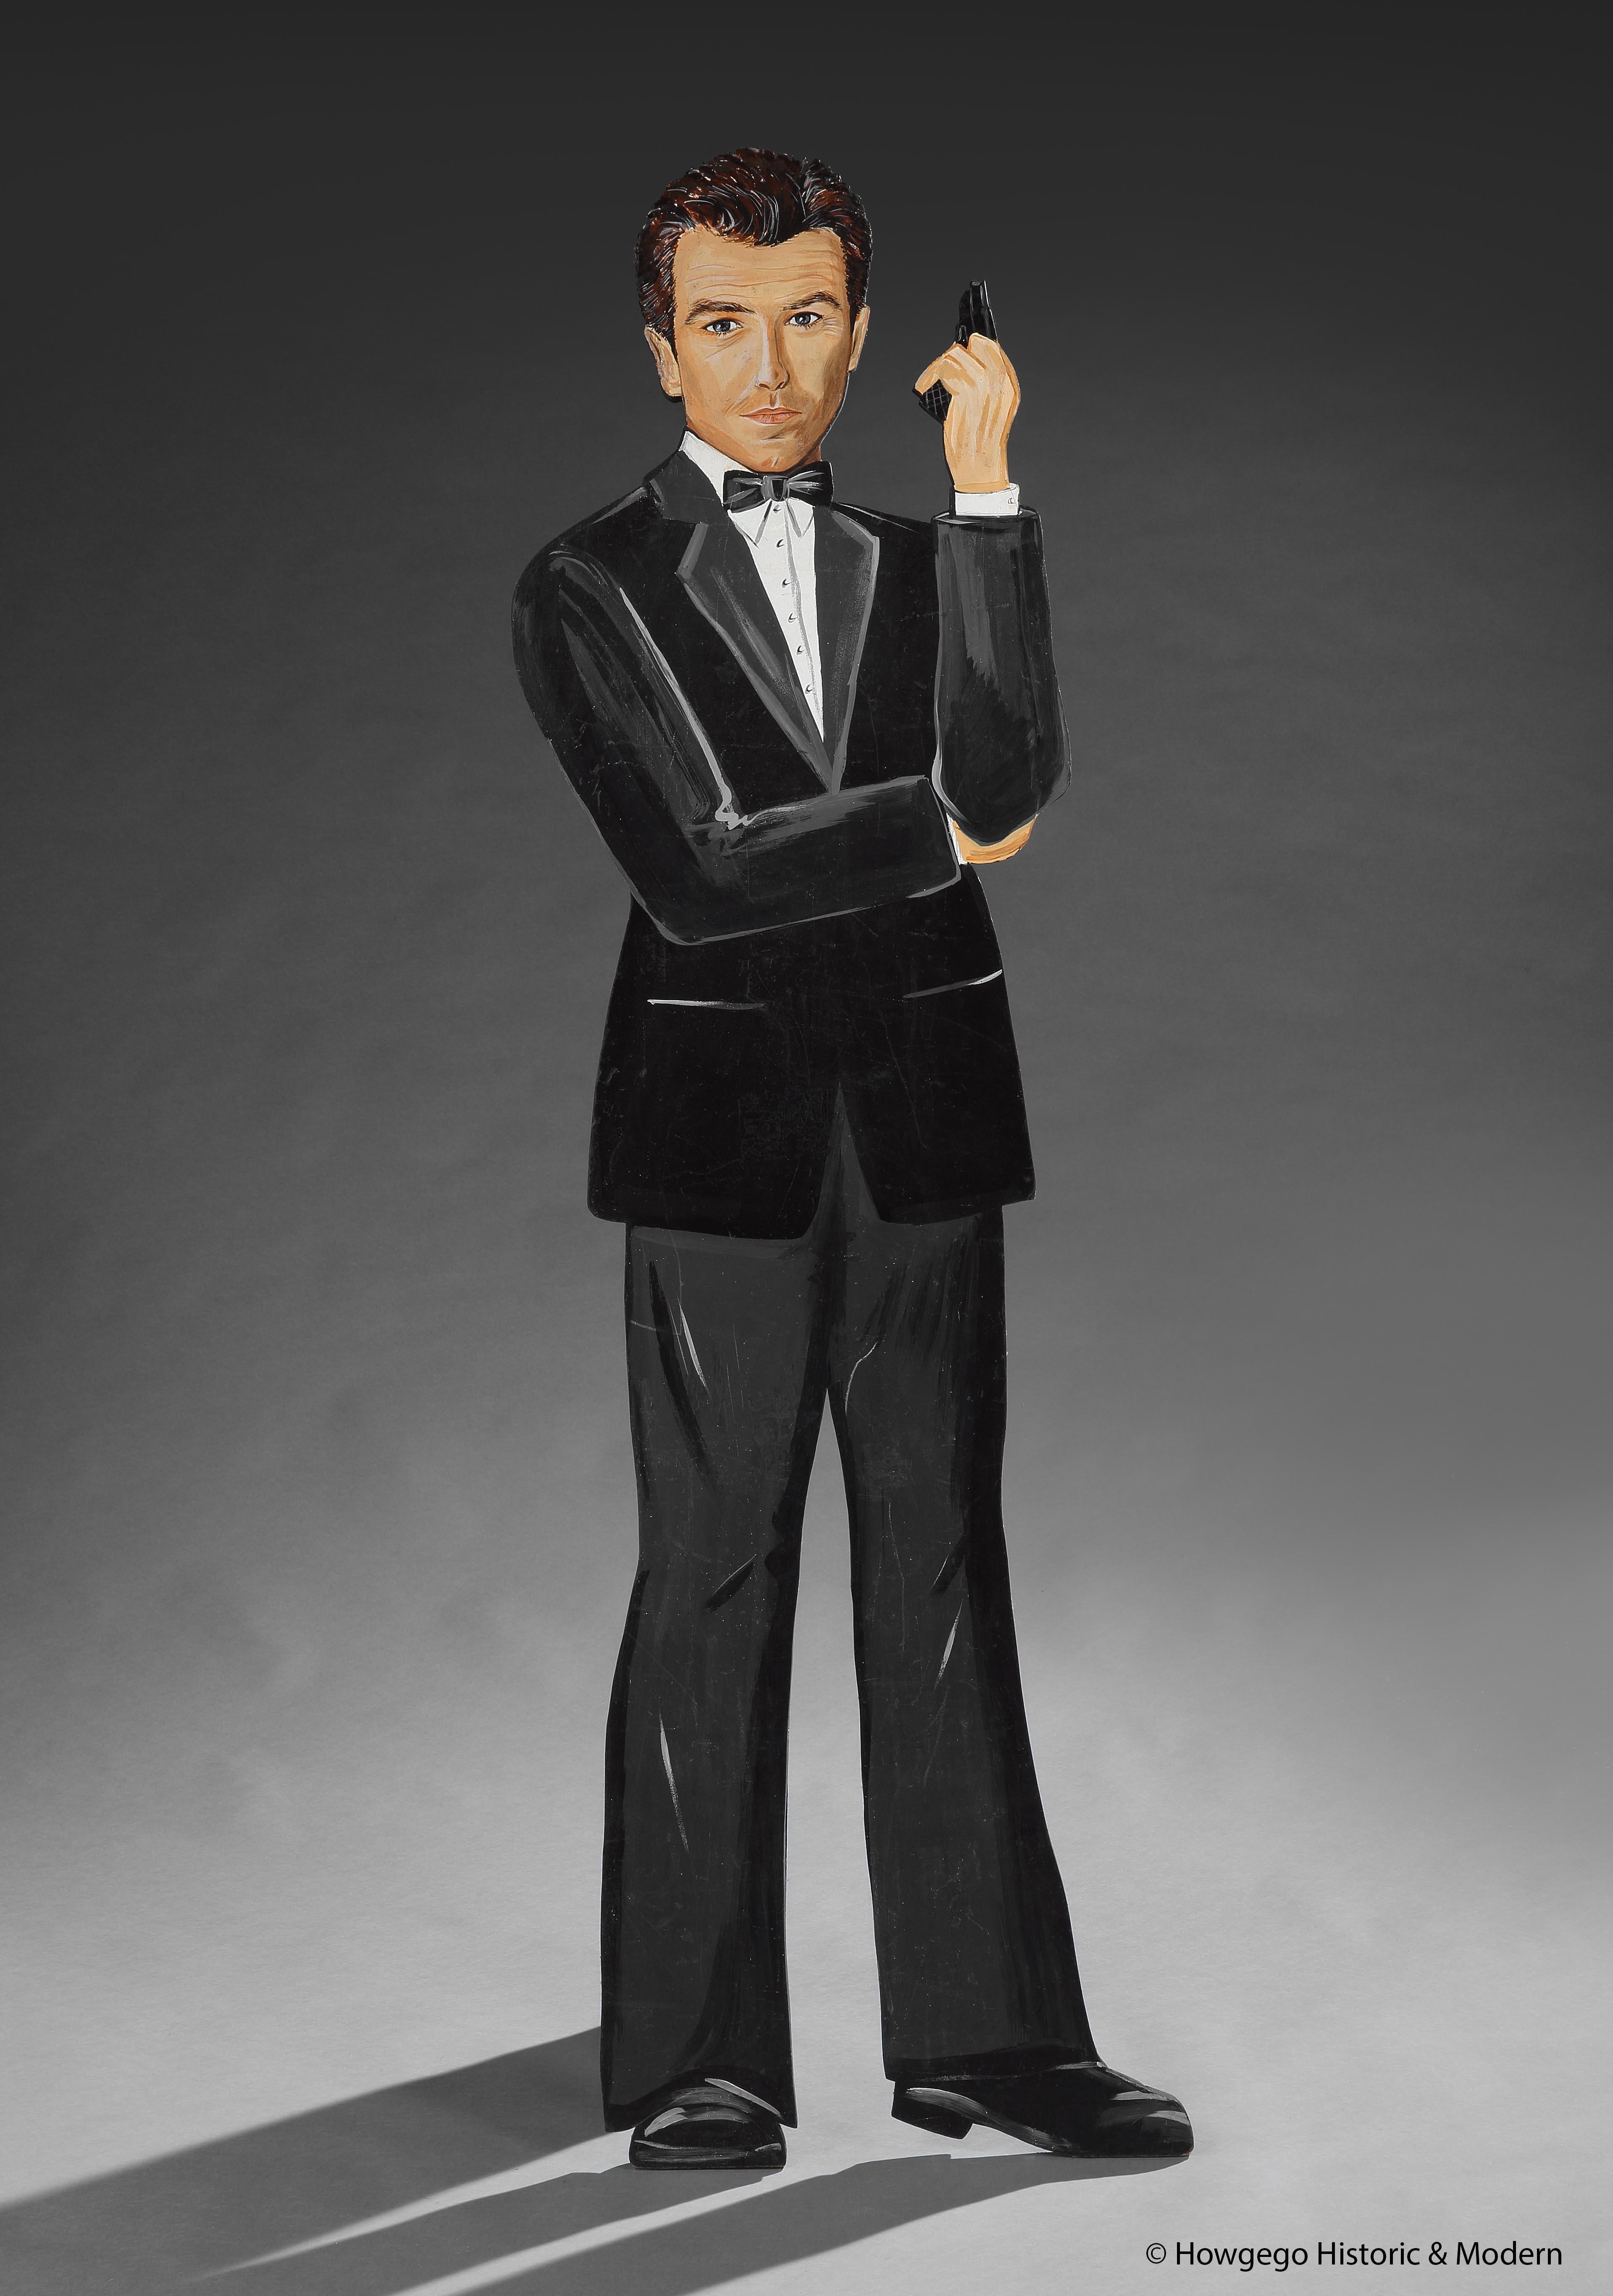 Fun conversation piece - James Bond in your home.
Great dumb waiter or prop, bigger than life size.
For the movie or film enthusiast. Measure: 81